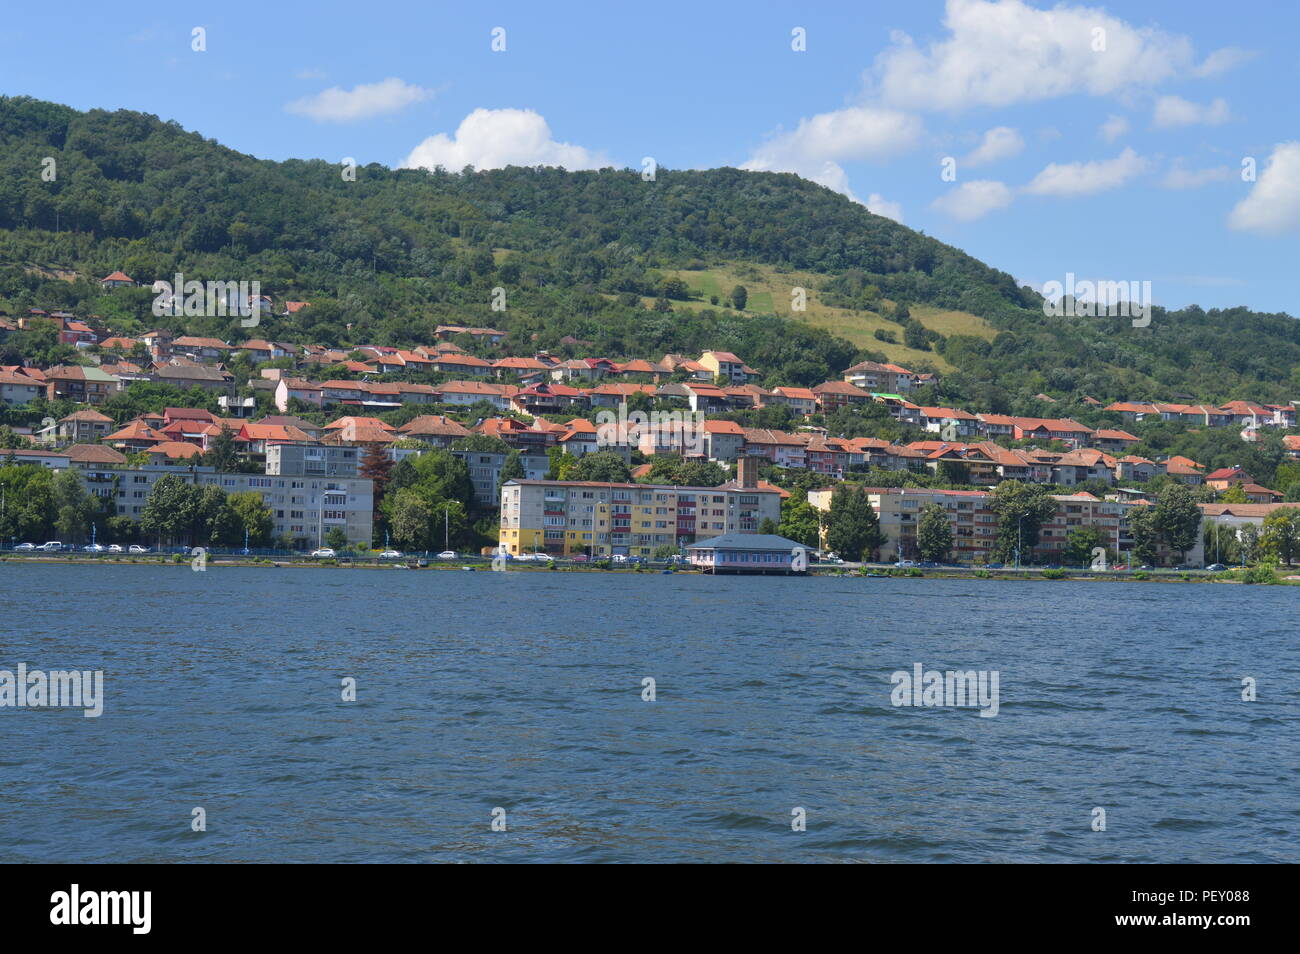 The Gorge of the Danube Stock Photo